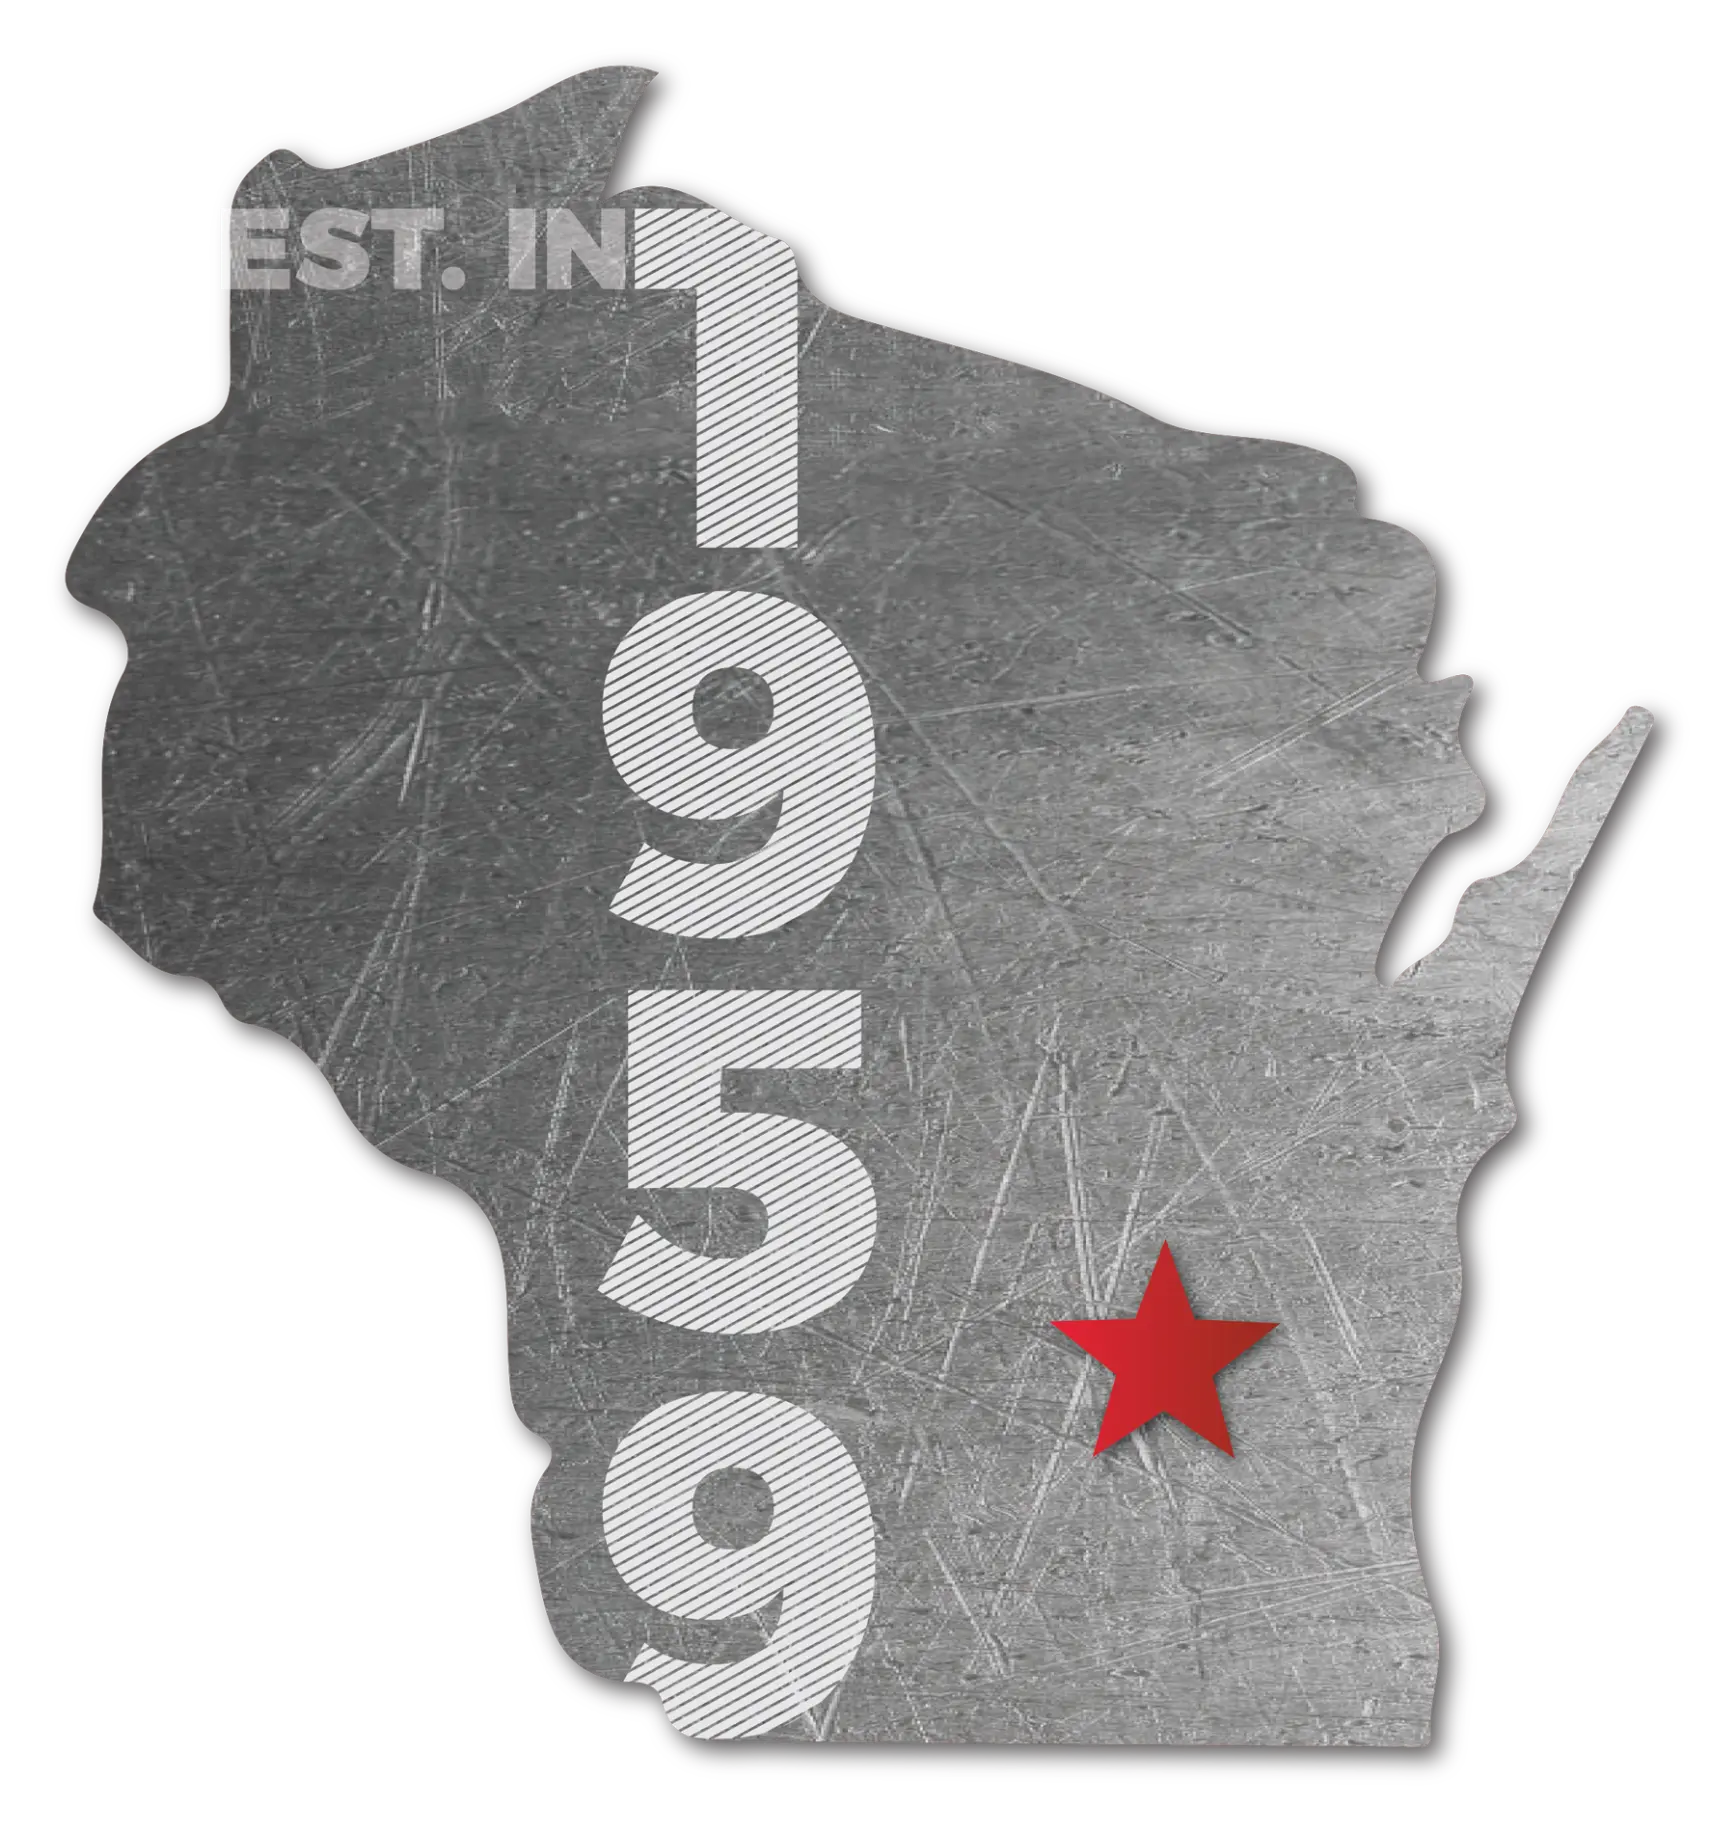 Wisconsin state outline with Established 1959 written in the middle.